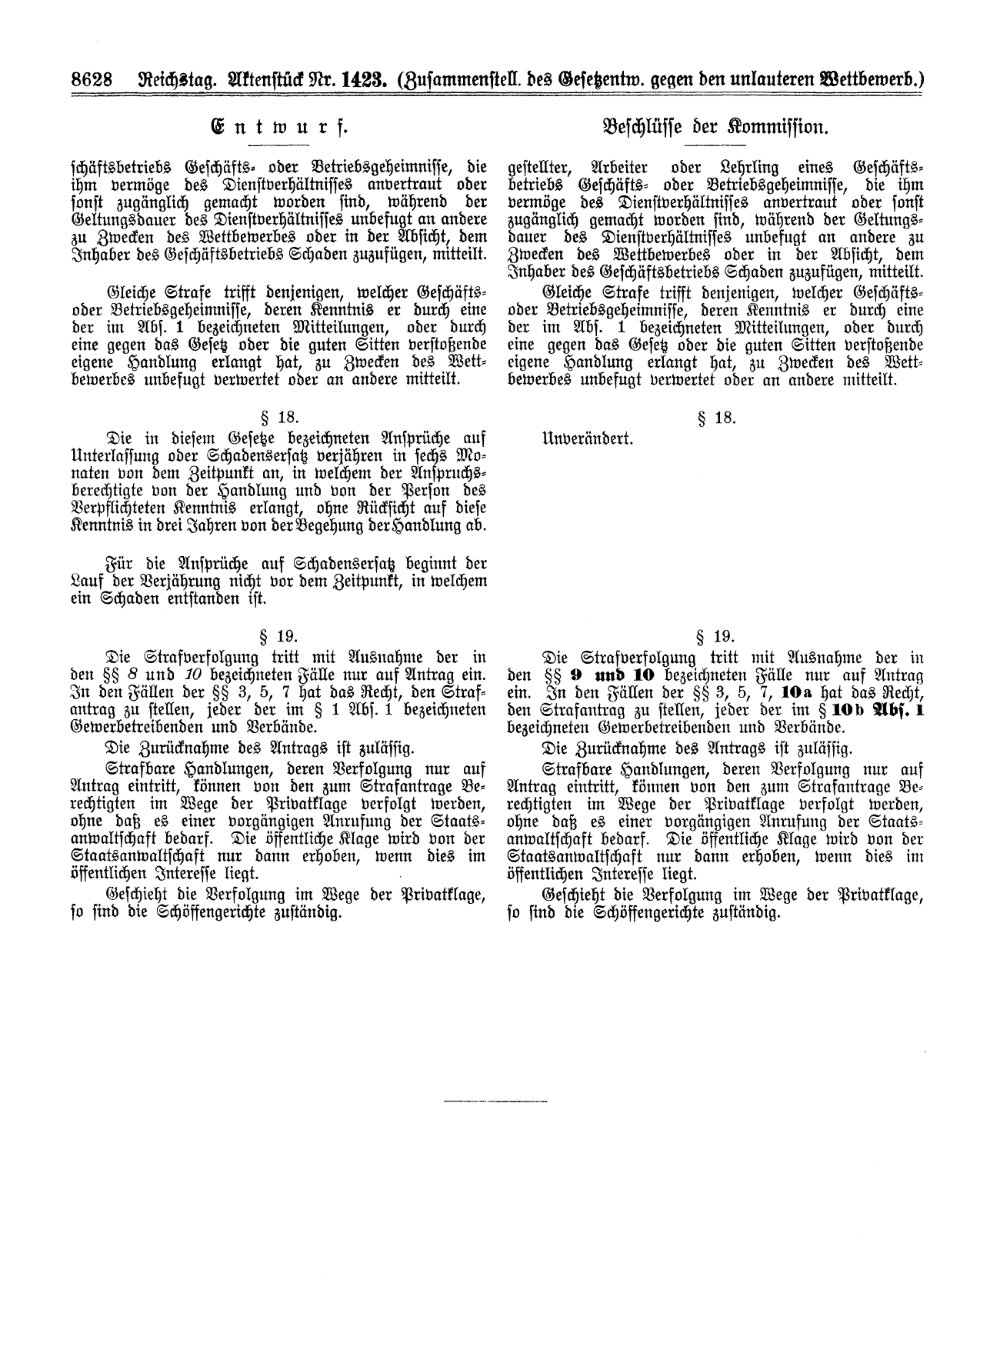 Scan of page 8628